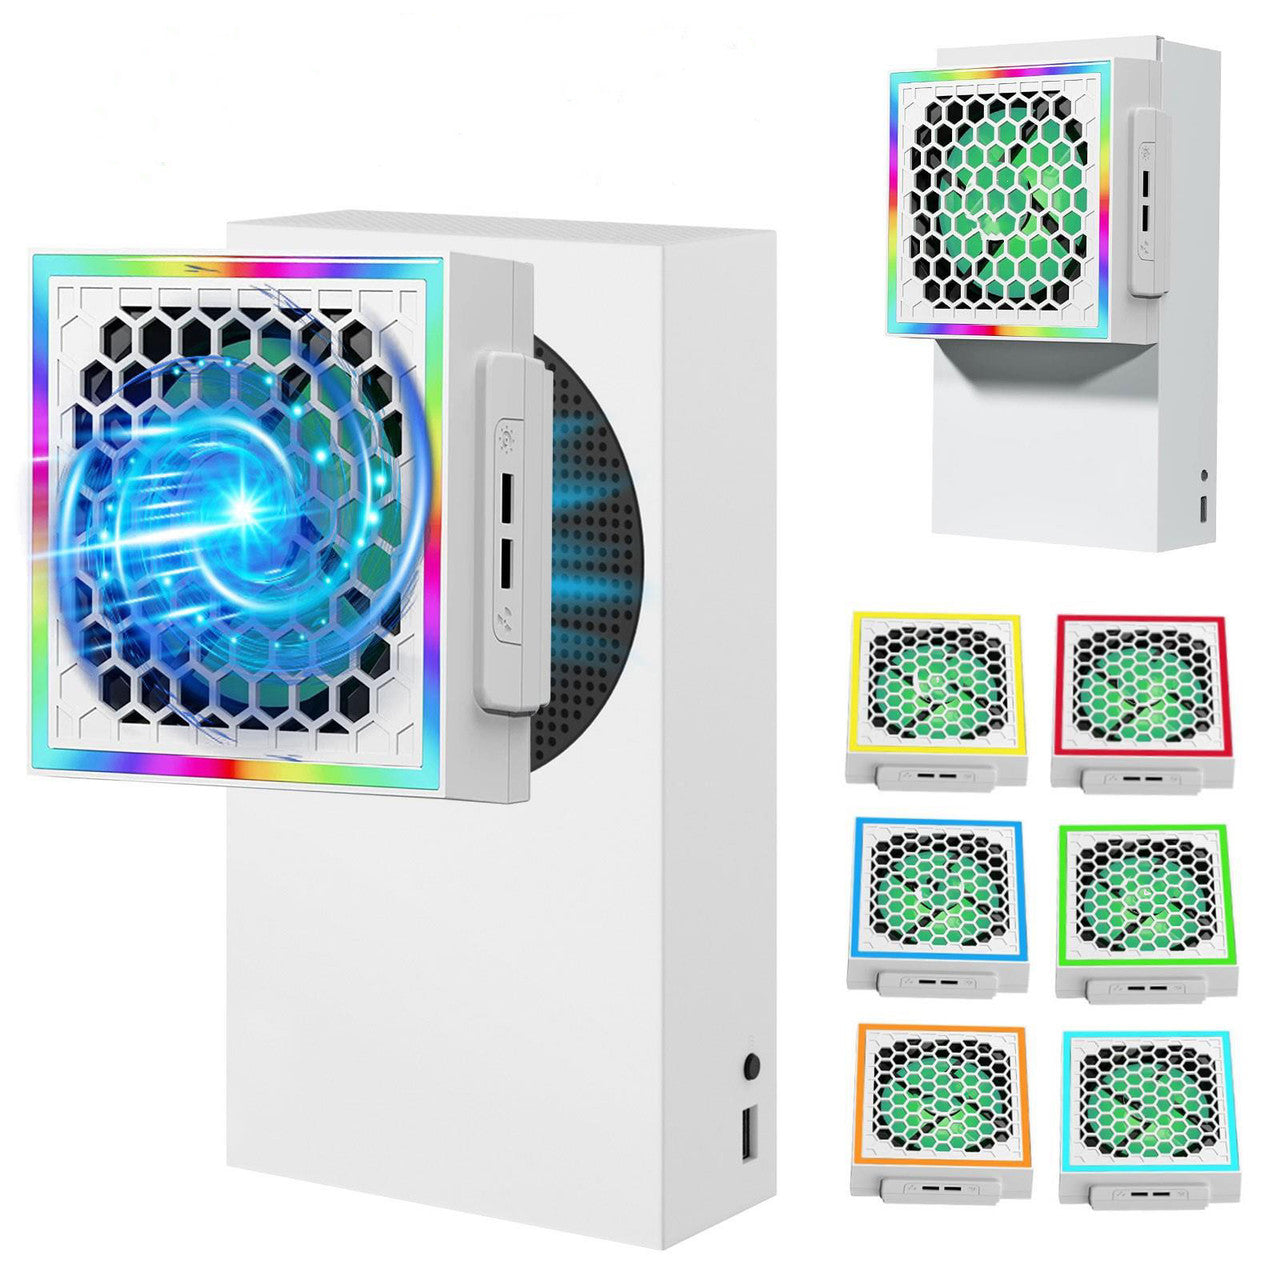 Game Cooling fan - with cool RGB atmosphere light Adjustable 7 Modes LED Light for Xbox Series S (White)